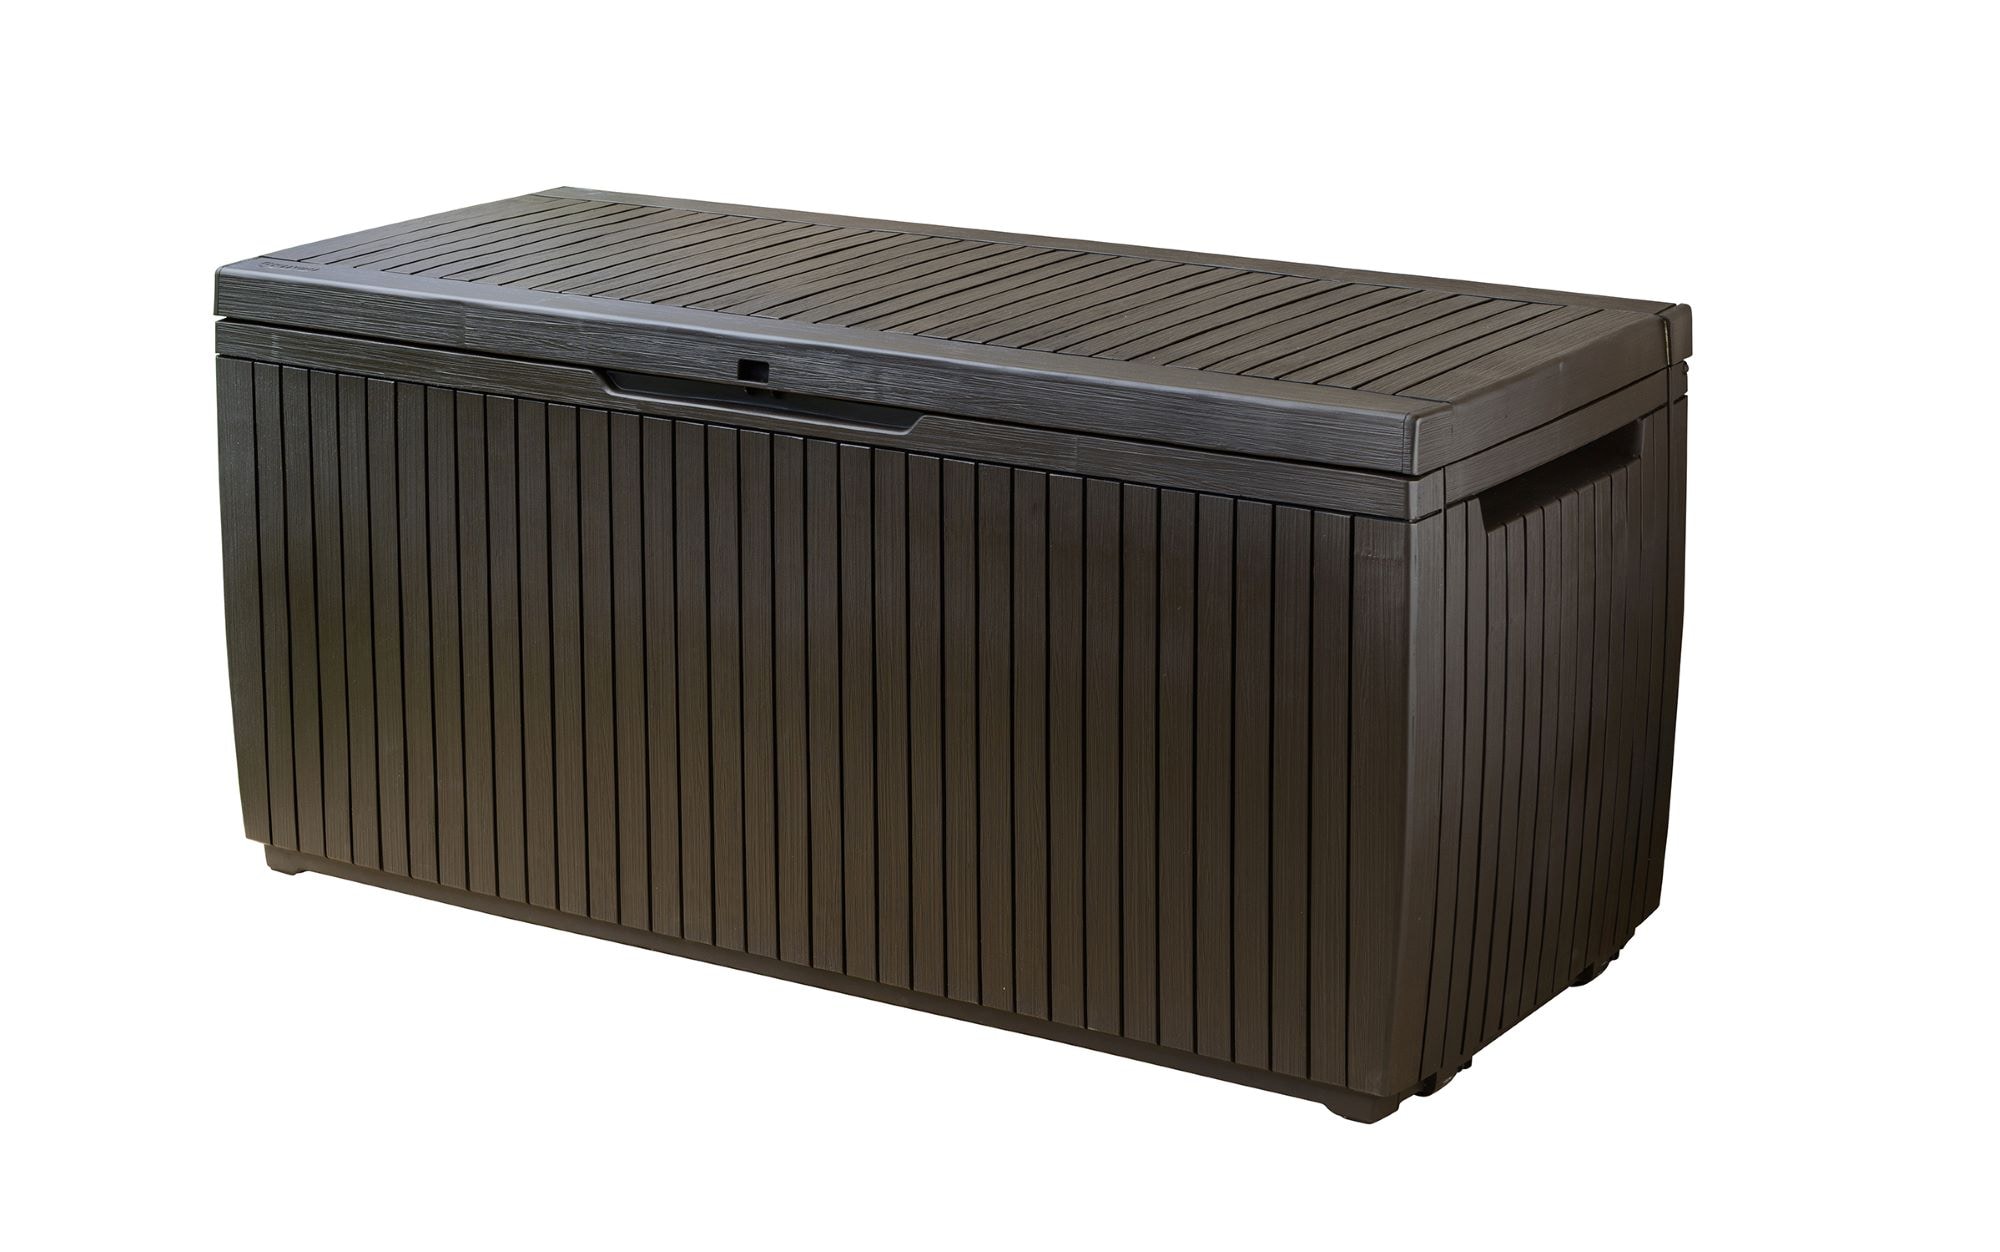 Rubbermaid 1837305 Patio Chic 65 Wide Resin Outdoor Storage Box